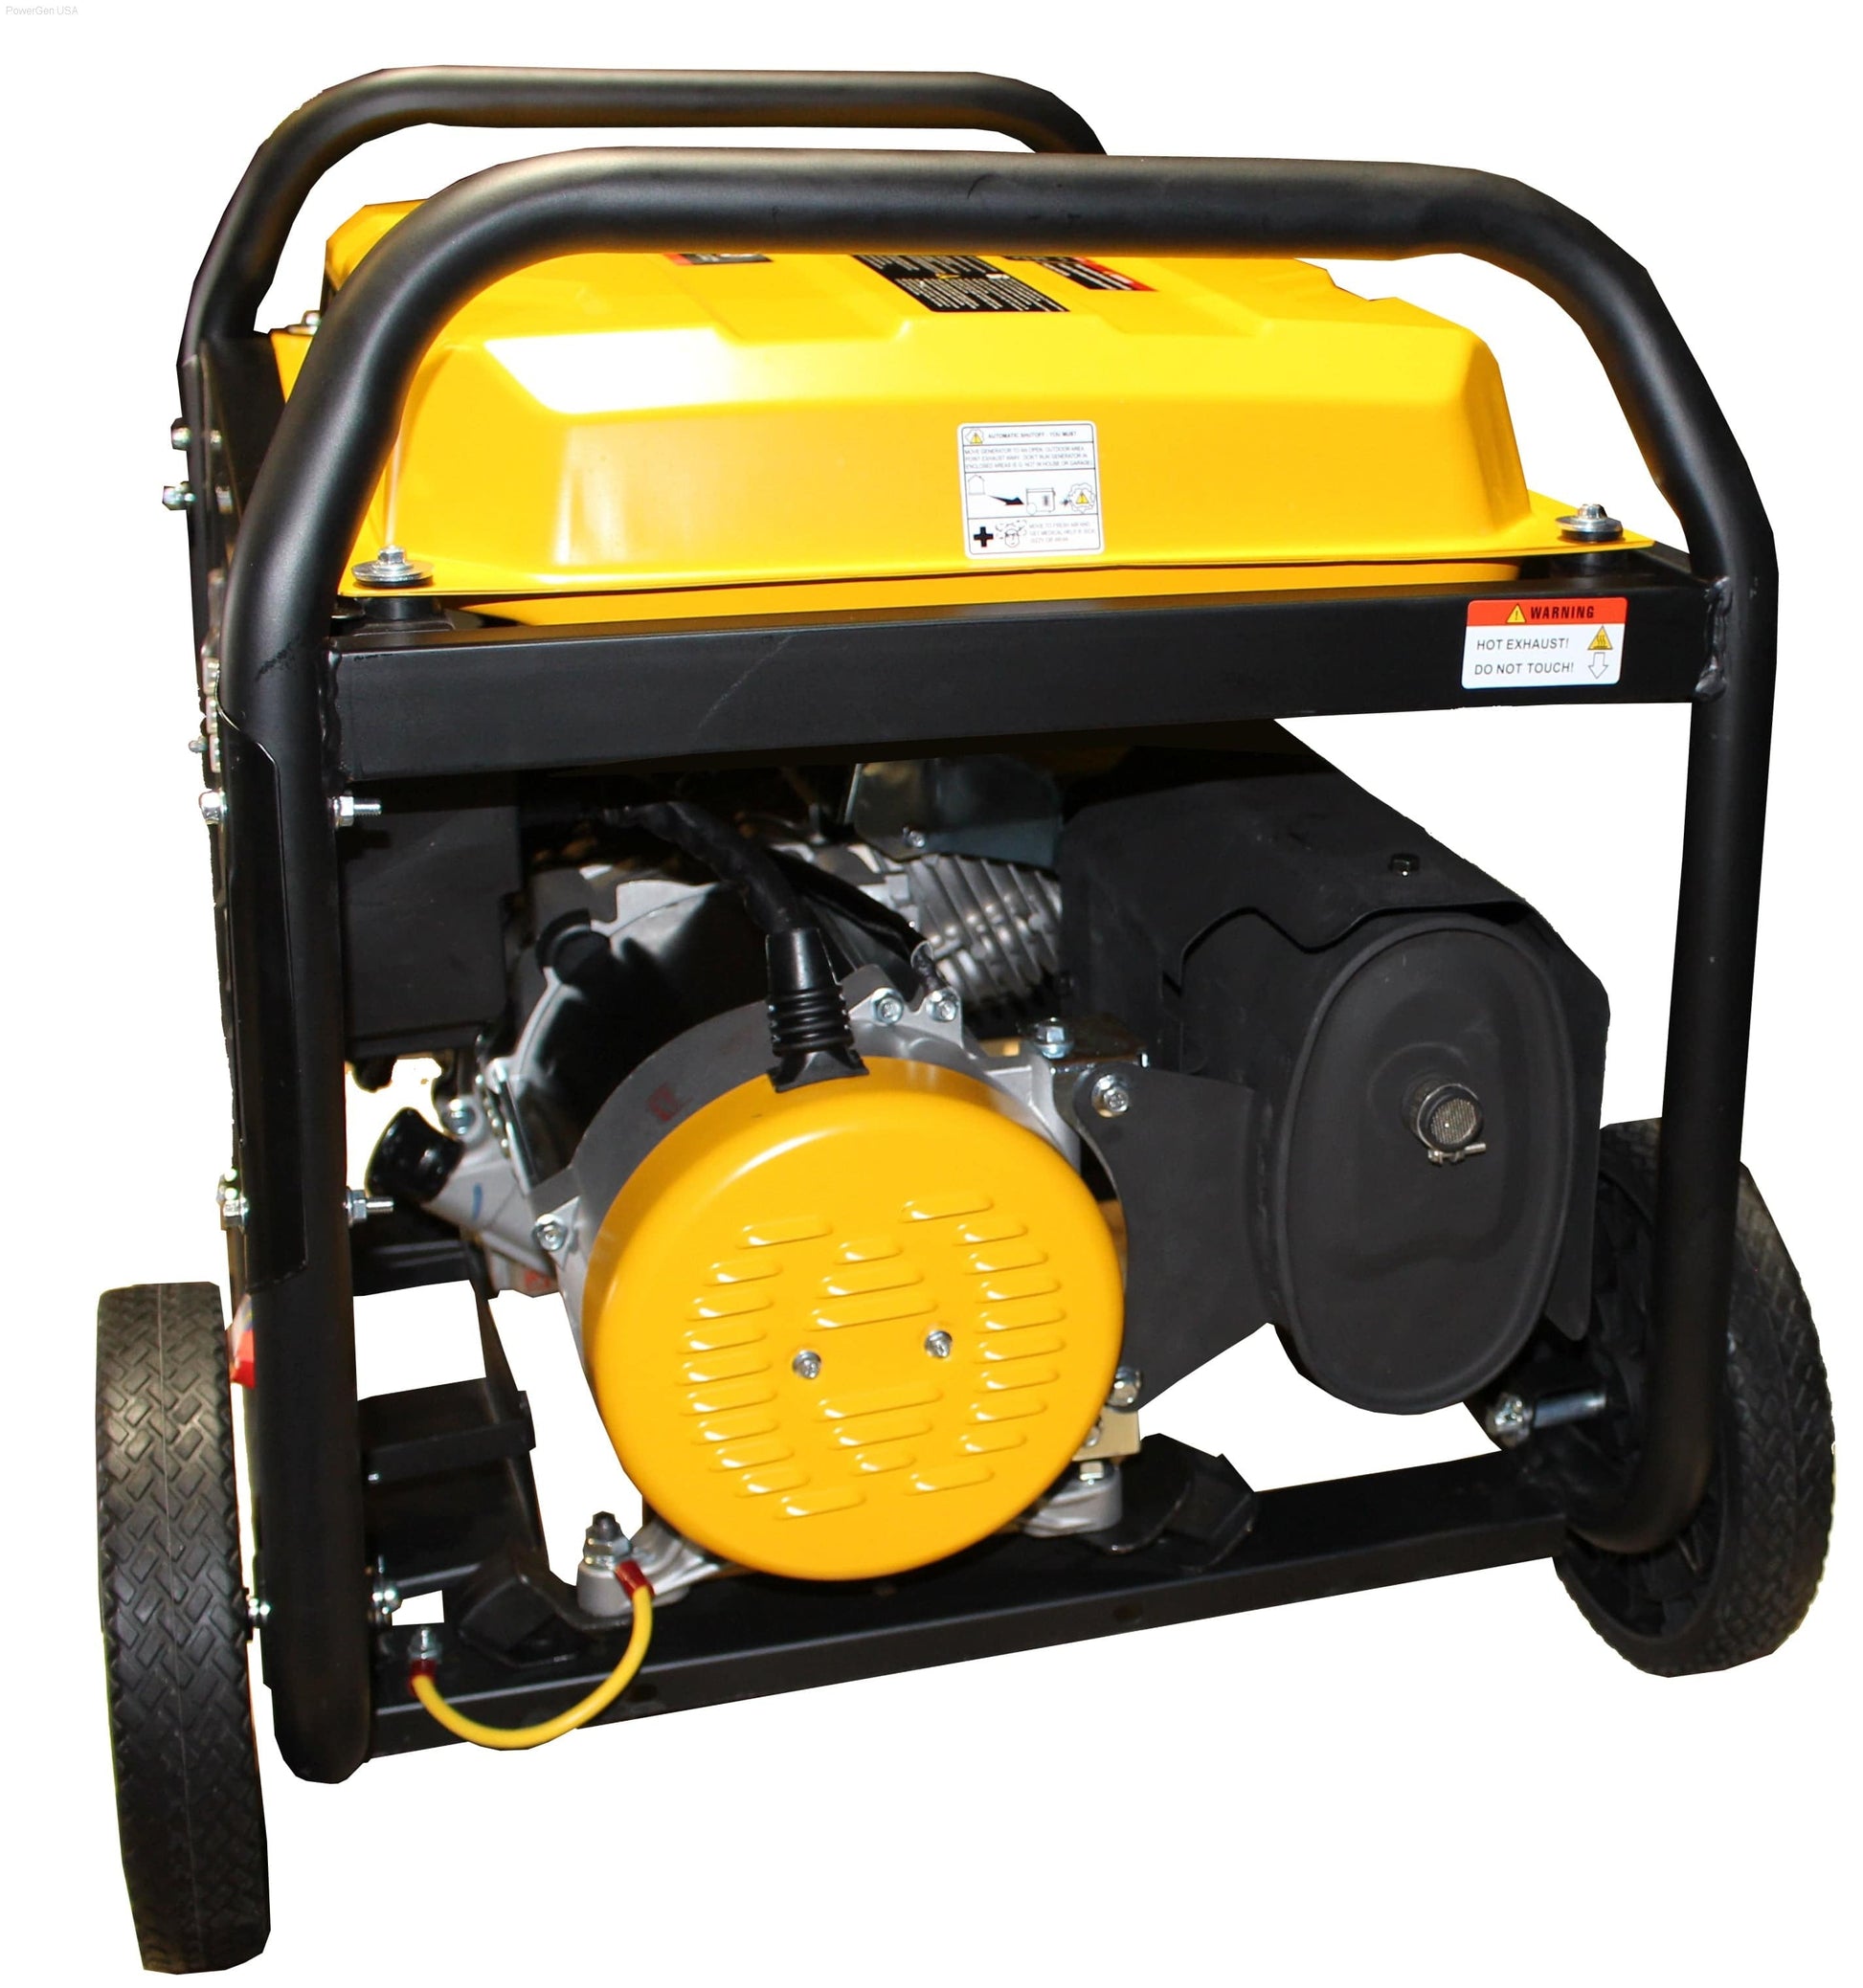 Gas Generators - Lifan Power USA PG8250E-CA / 8250W Surge 6600W Rated Electric / Recoil Start Open Frame Generator